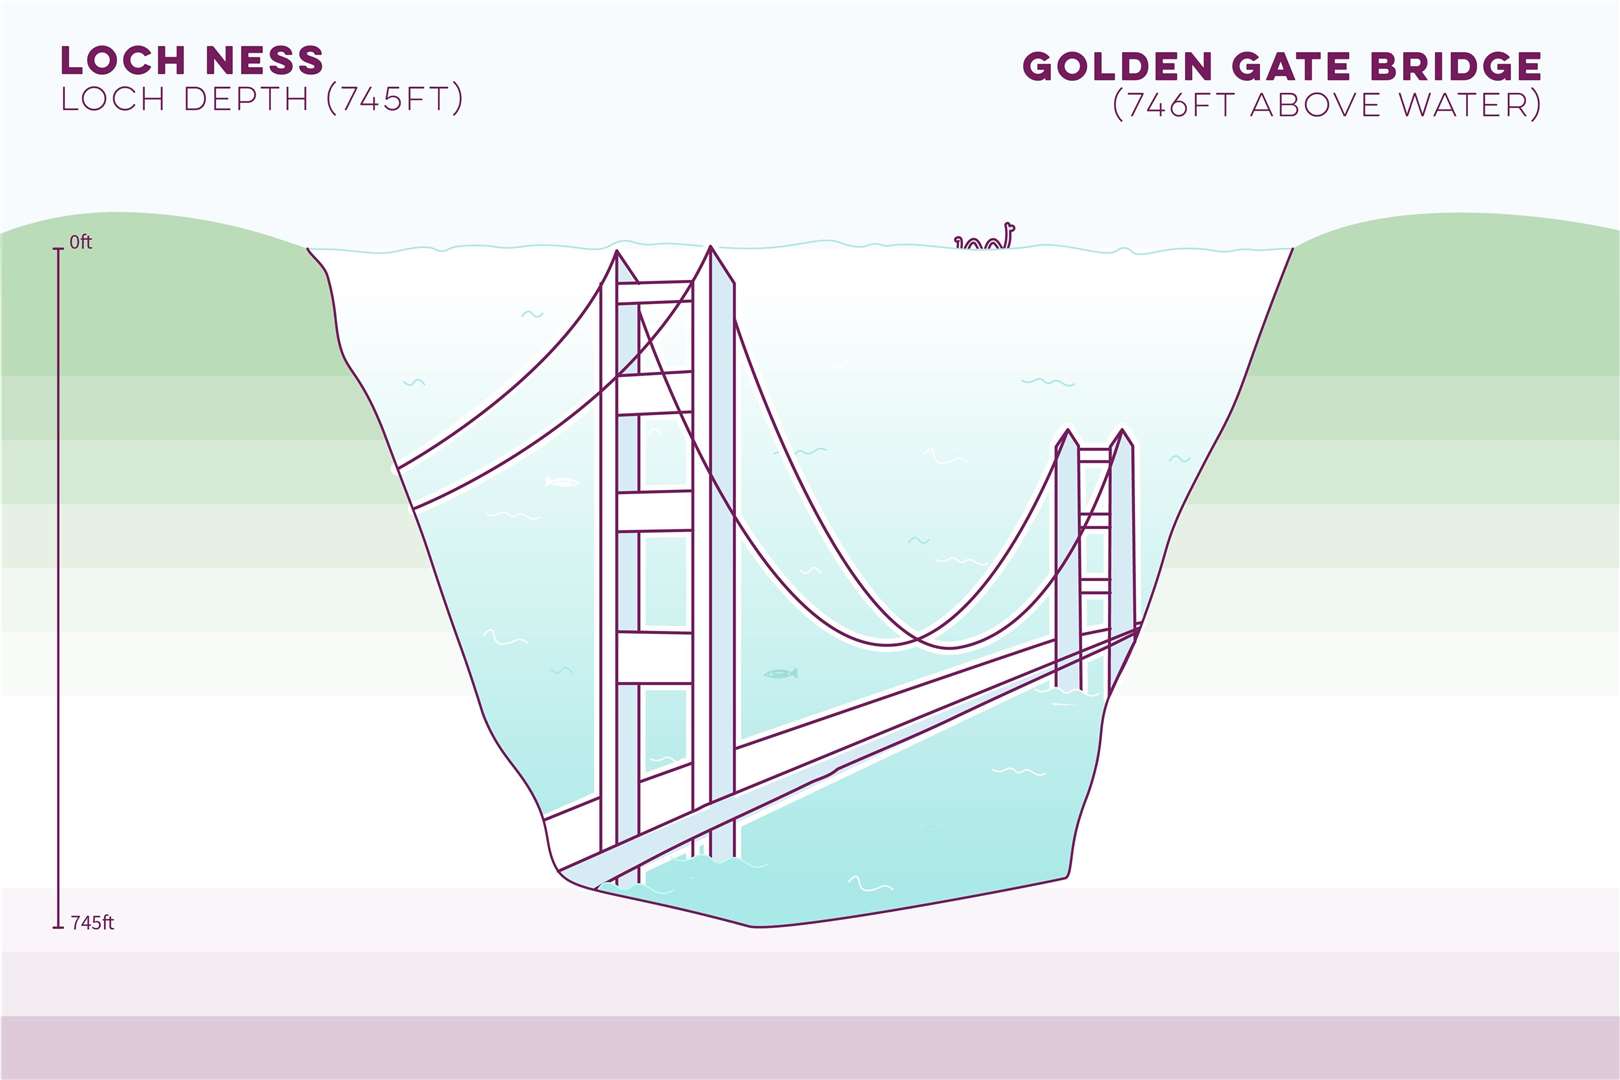 New images show the depth of Loch Ness compared with the height of the Golden Gate Bridge.